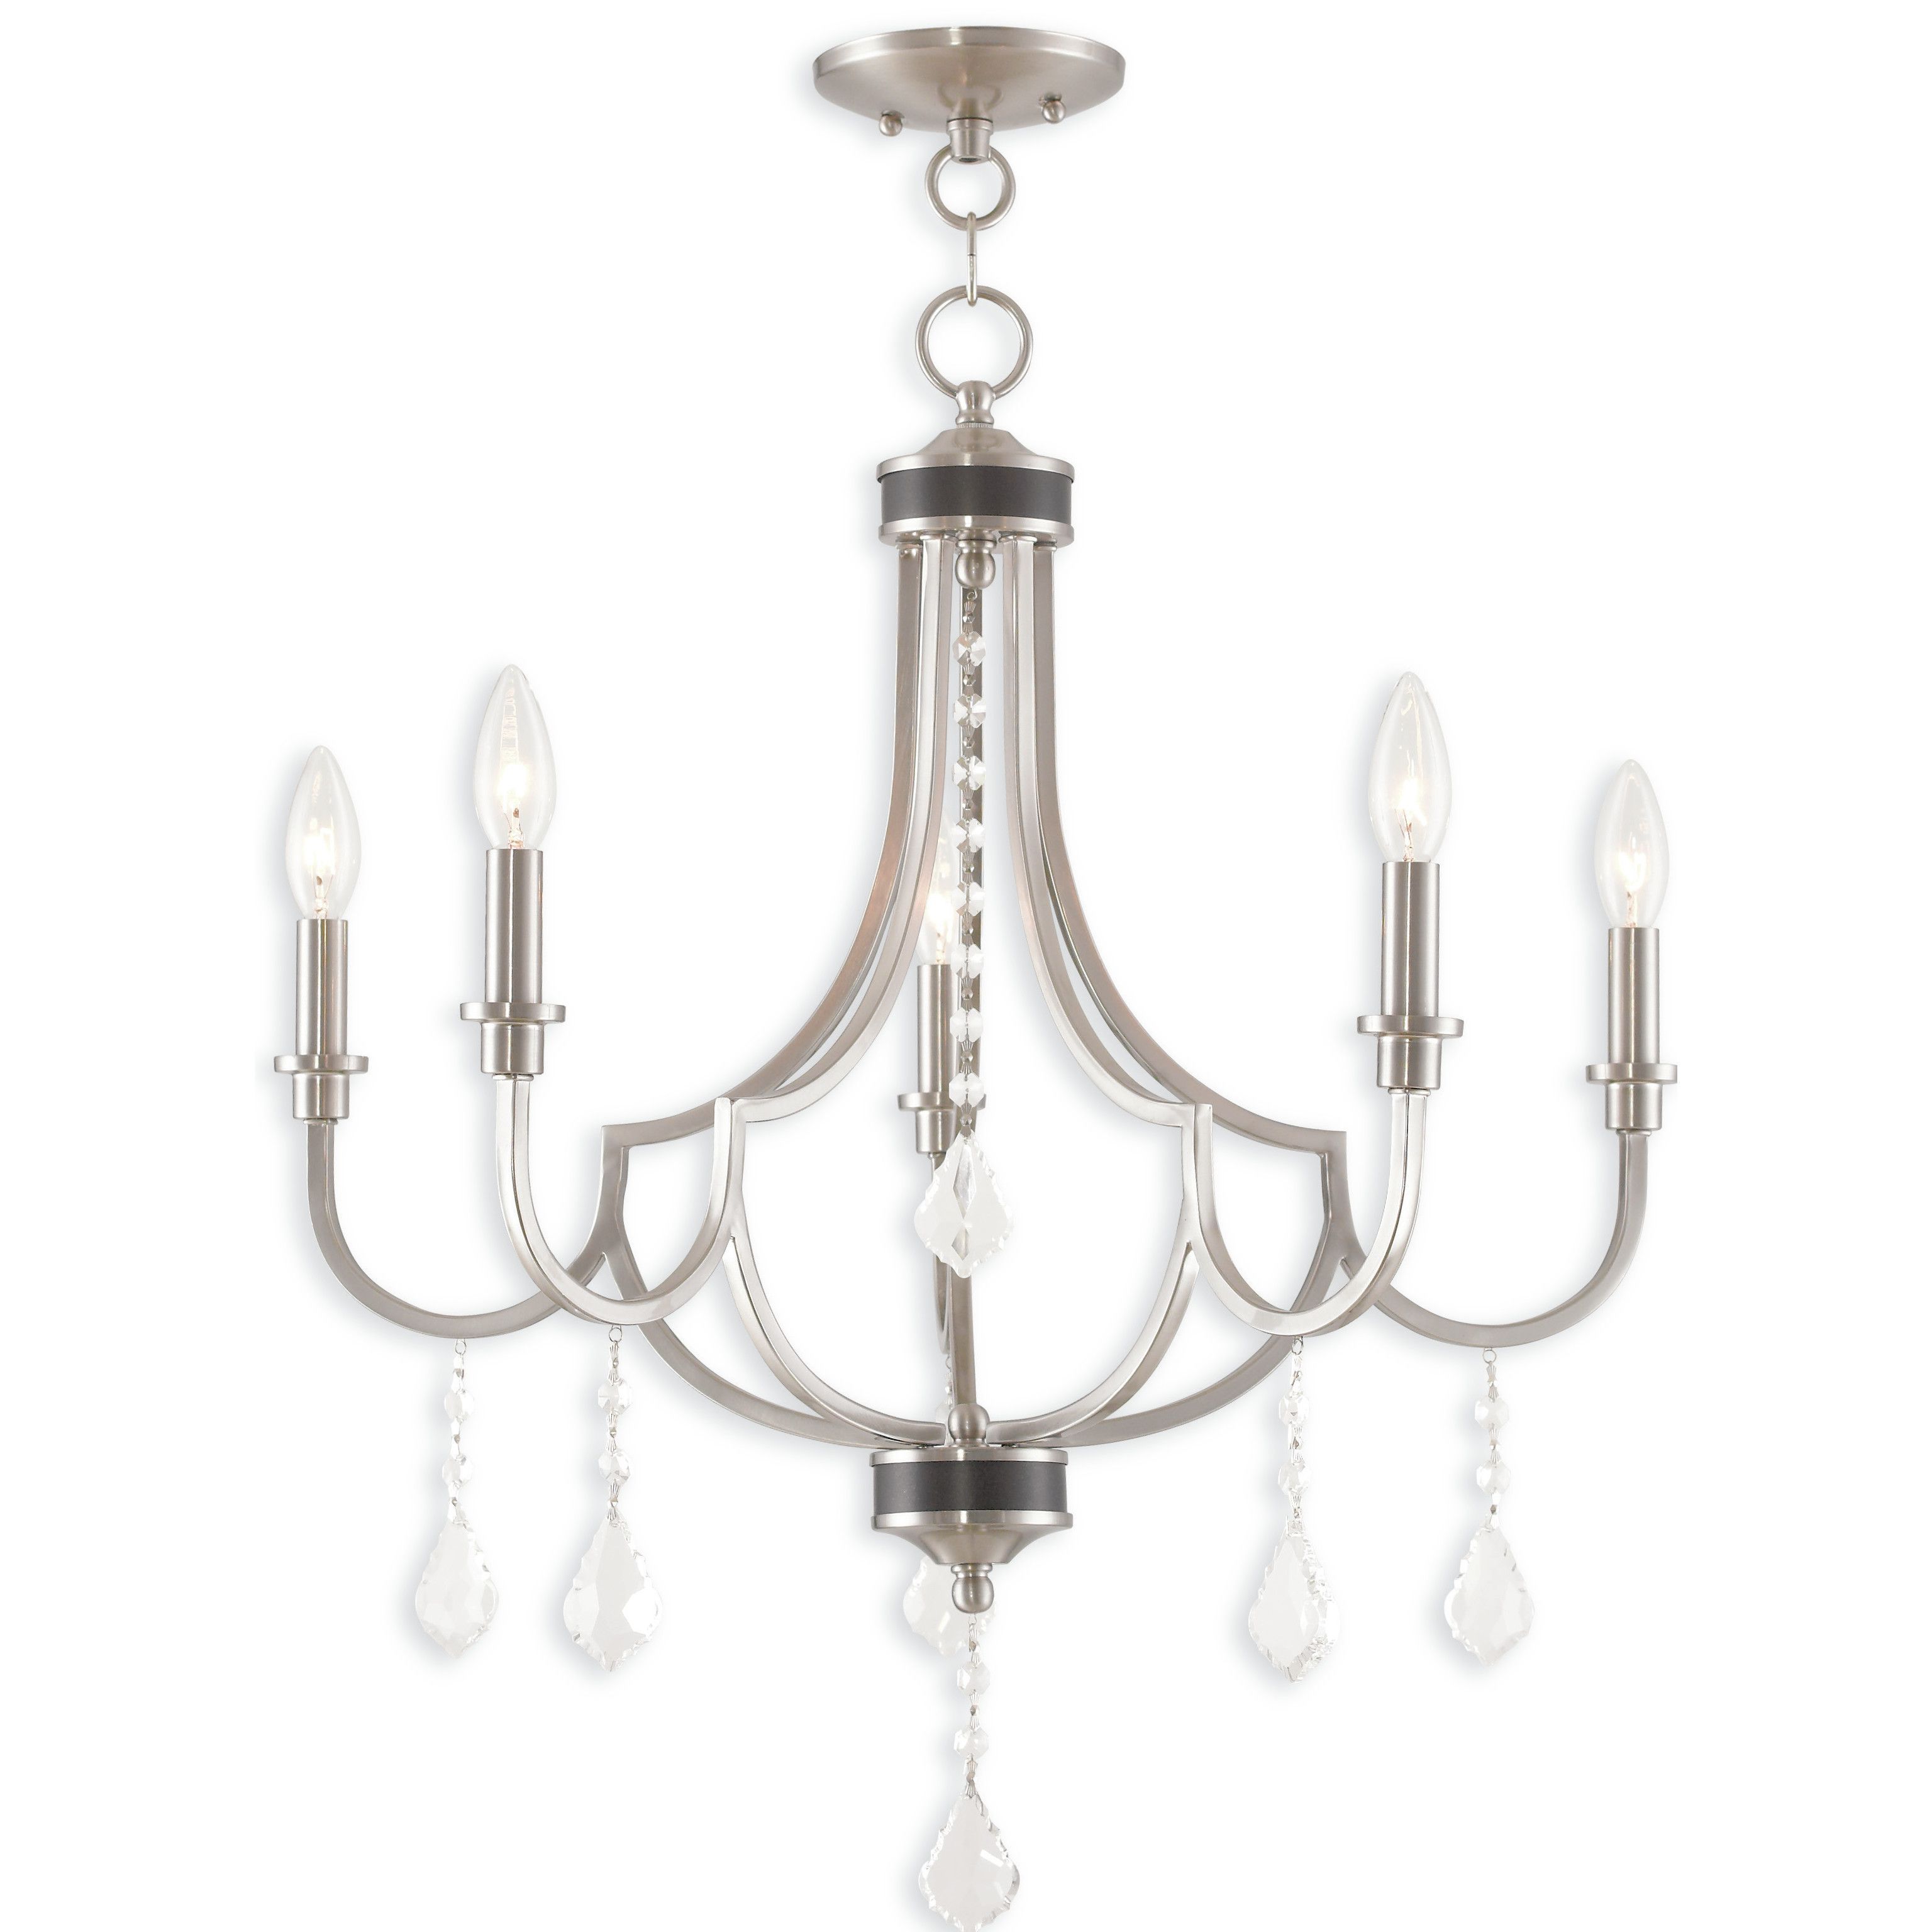 Popular Berger 5 Light Candle Style Chandeliers Regarding Customer Image Zoomed (View 14 of 25)